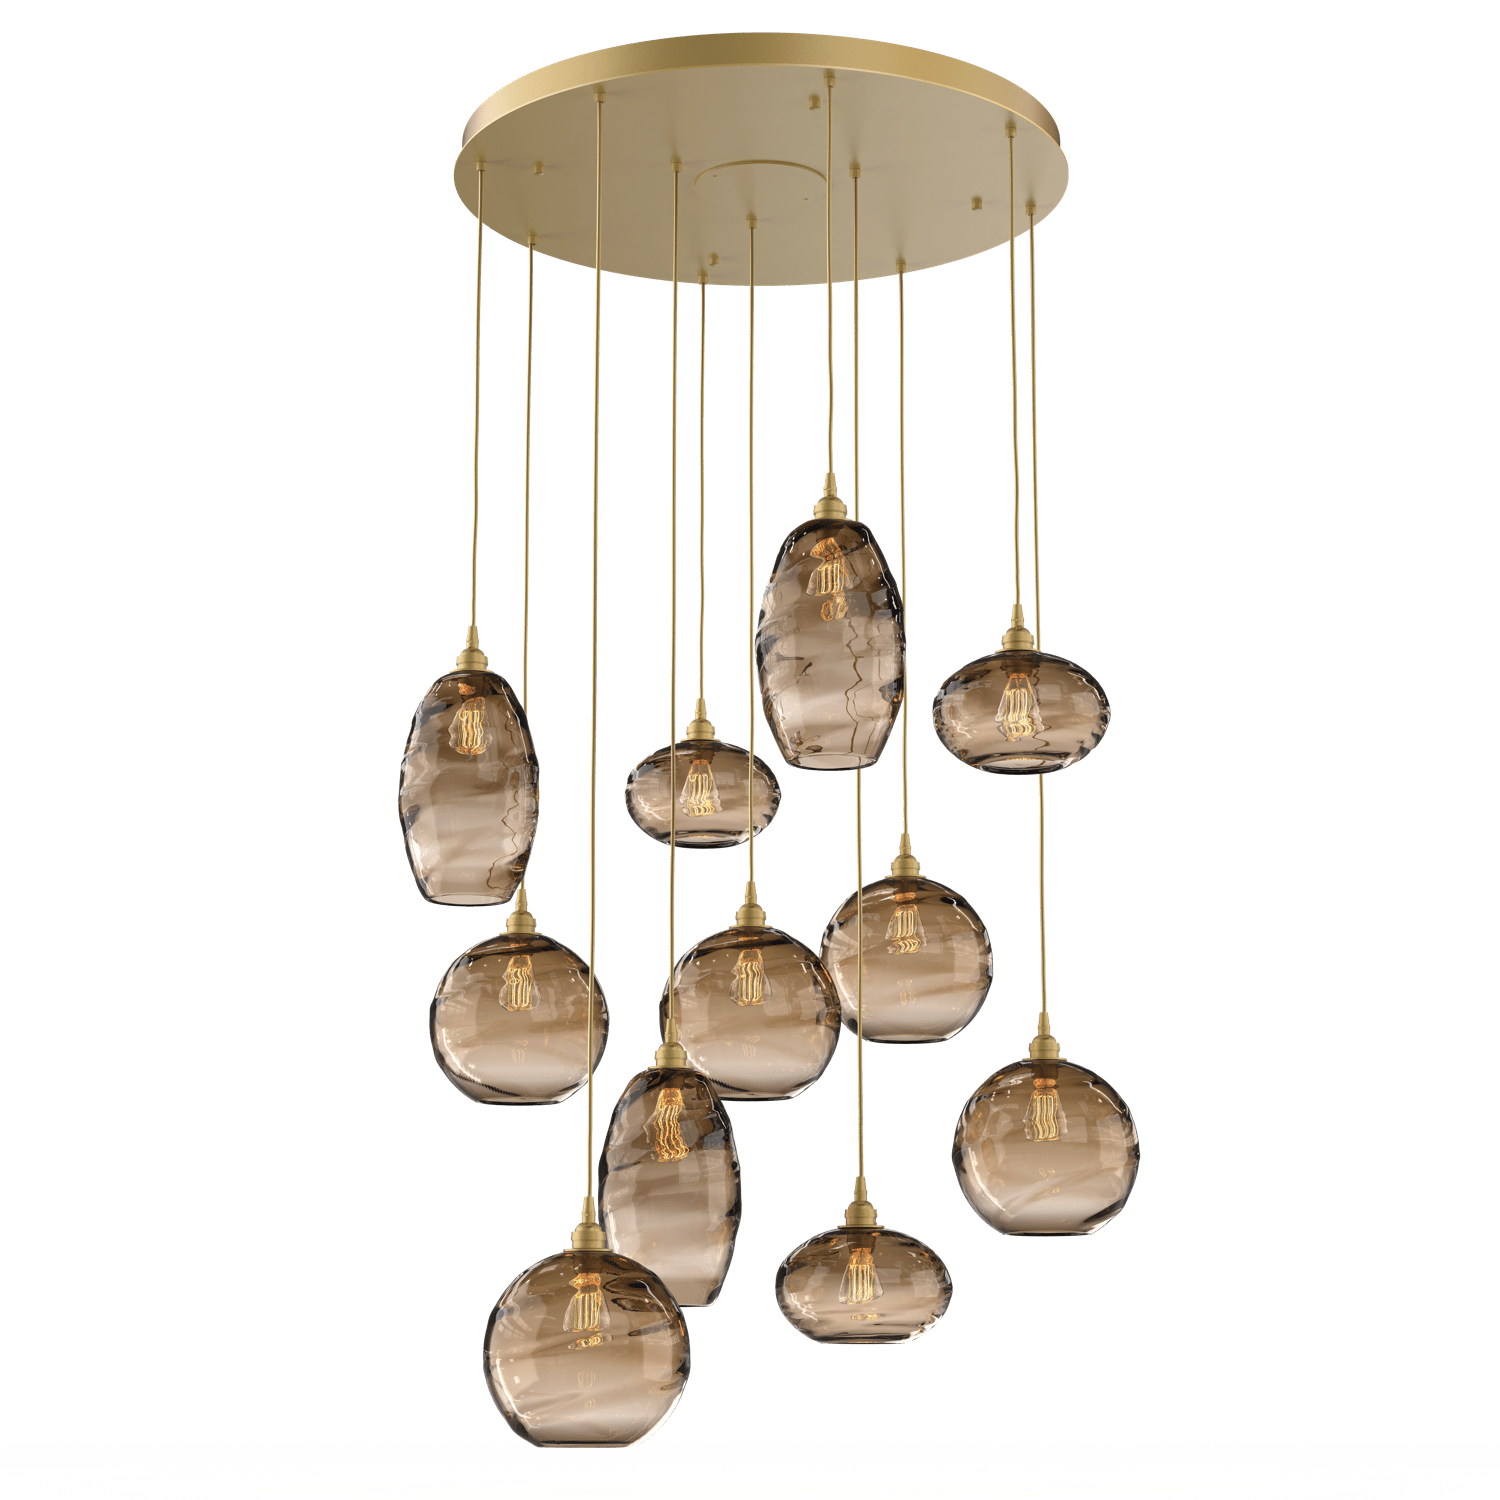 CHB0048-11-GB-OB-Hammerton-Studio-Optic-Blown-Glass-Misto-11-light-round-pendant-chandelier-with-gilded-brass-finish-and-optic-bronze-blown-glass-shades-and-incandescent-lamping